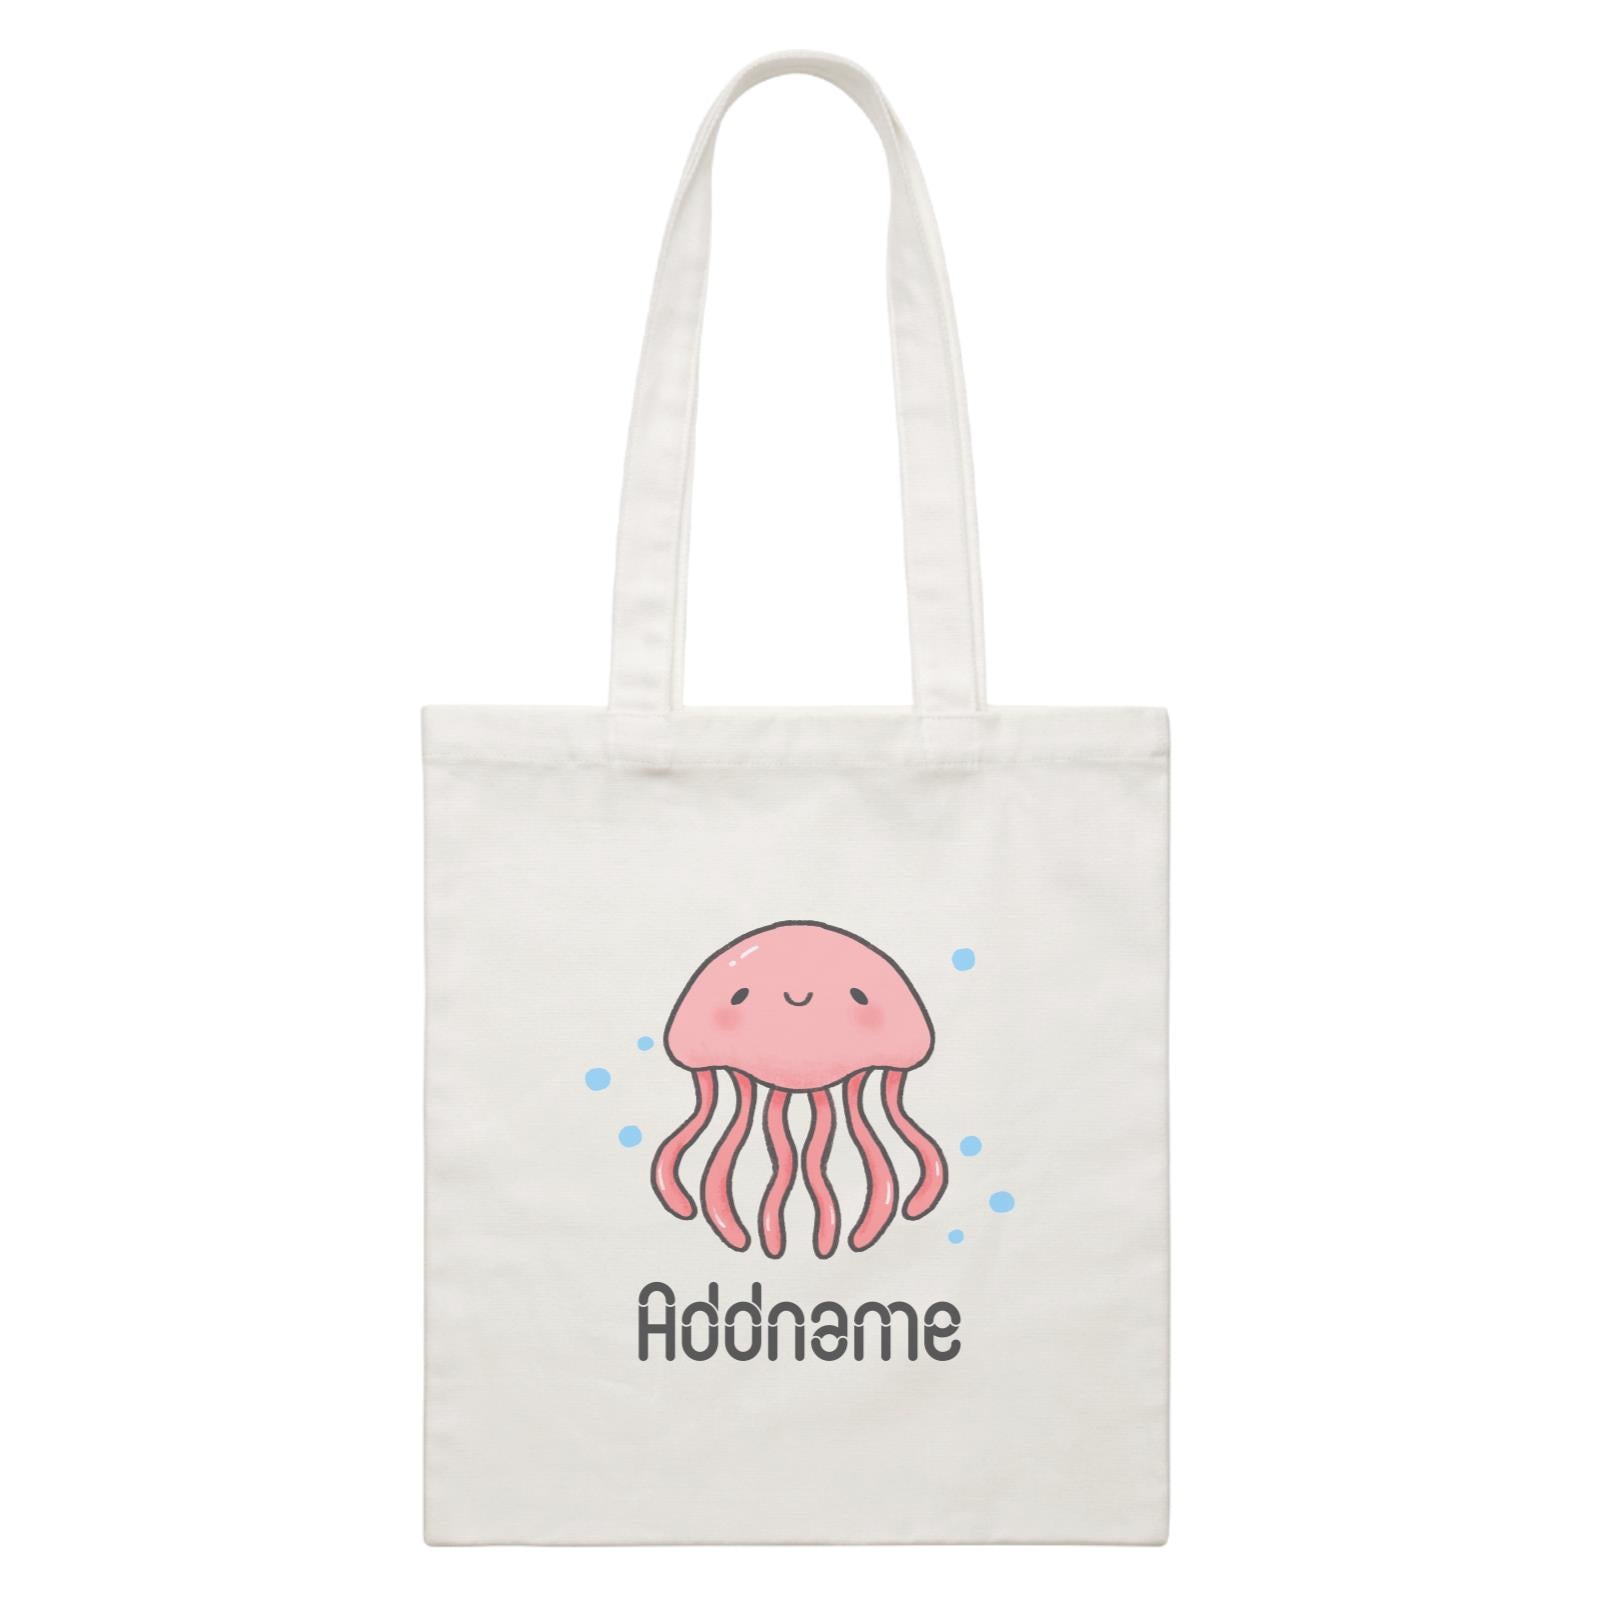 Cute Hand Drawn Style Jellyfish Addname White Canvas Bag